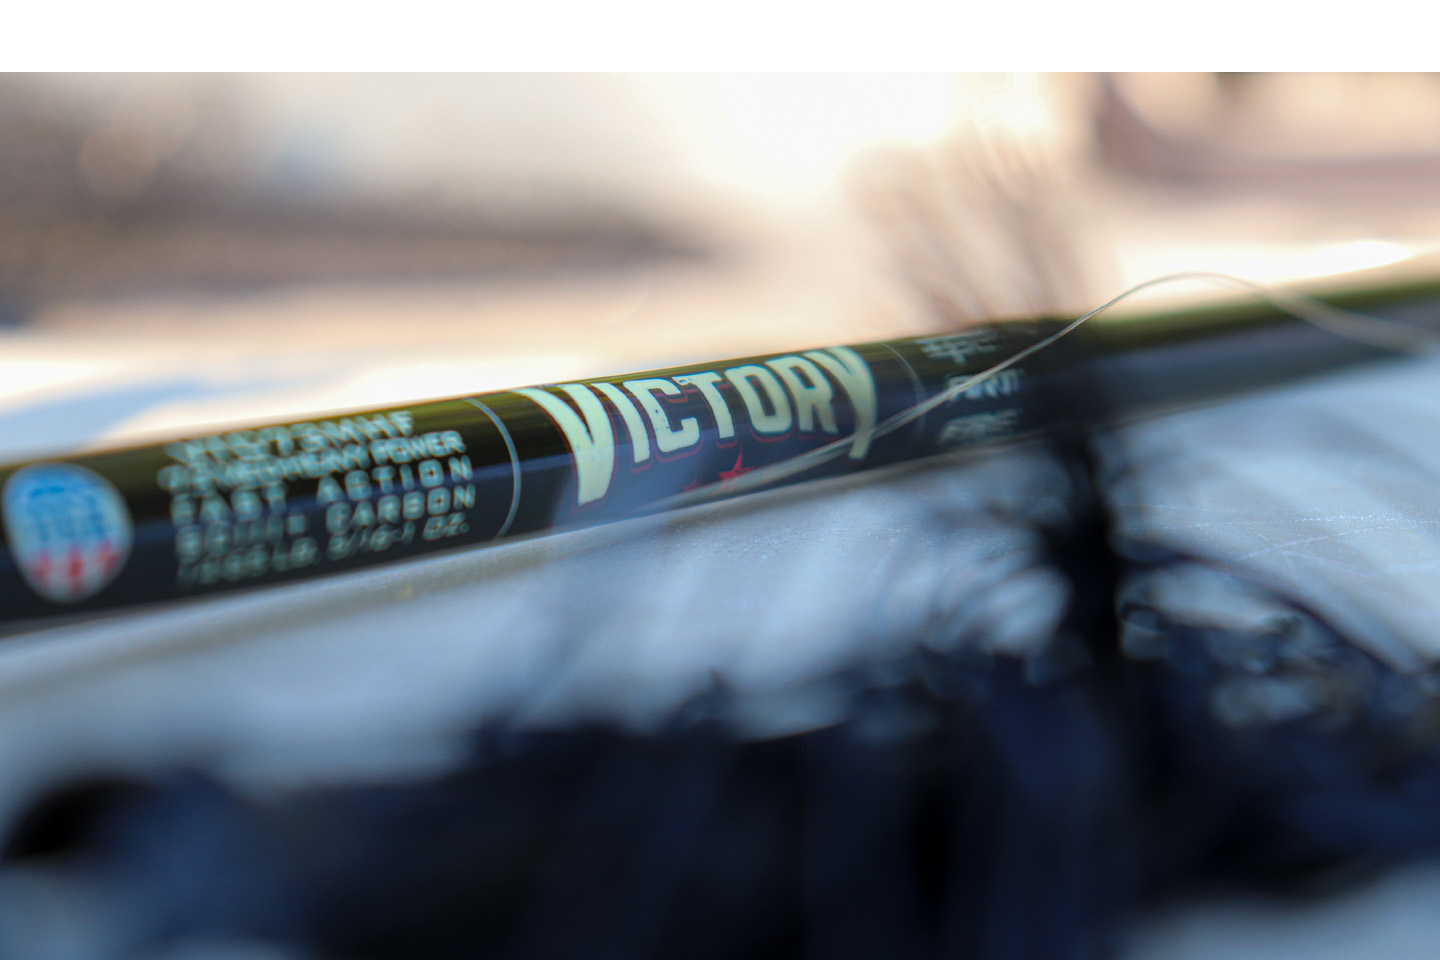 Best Rods For Fishing The Boundary Waters